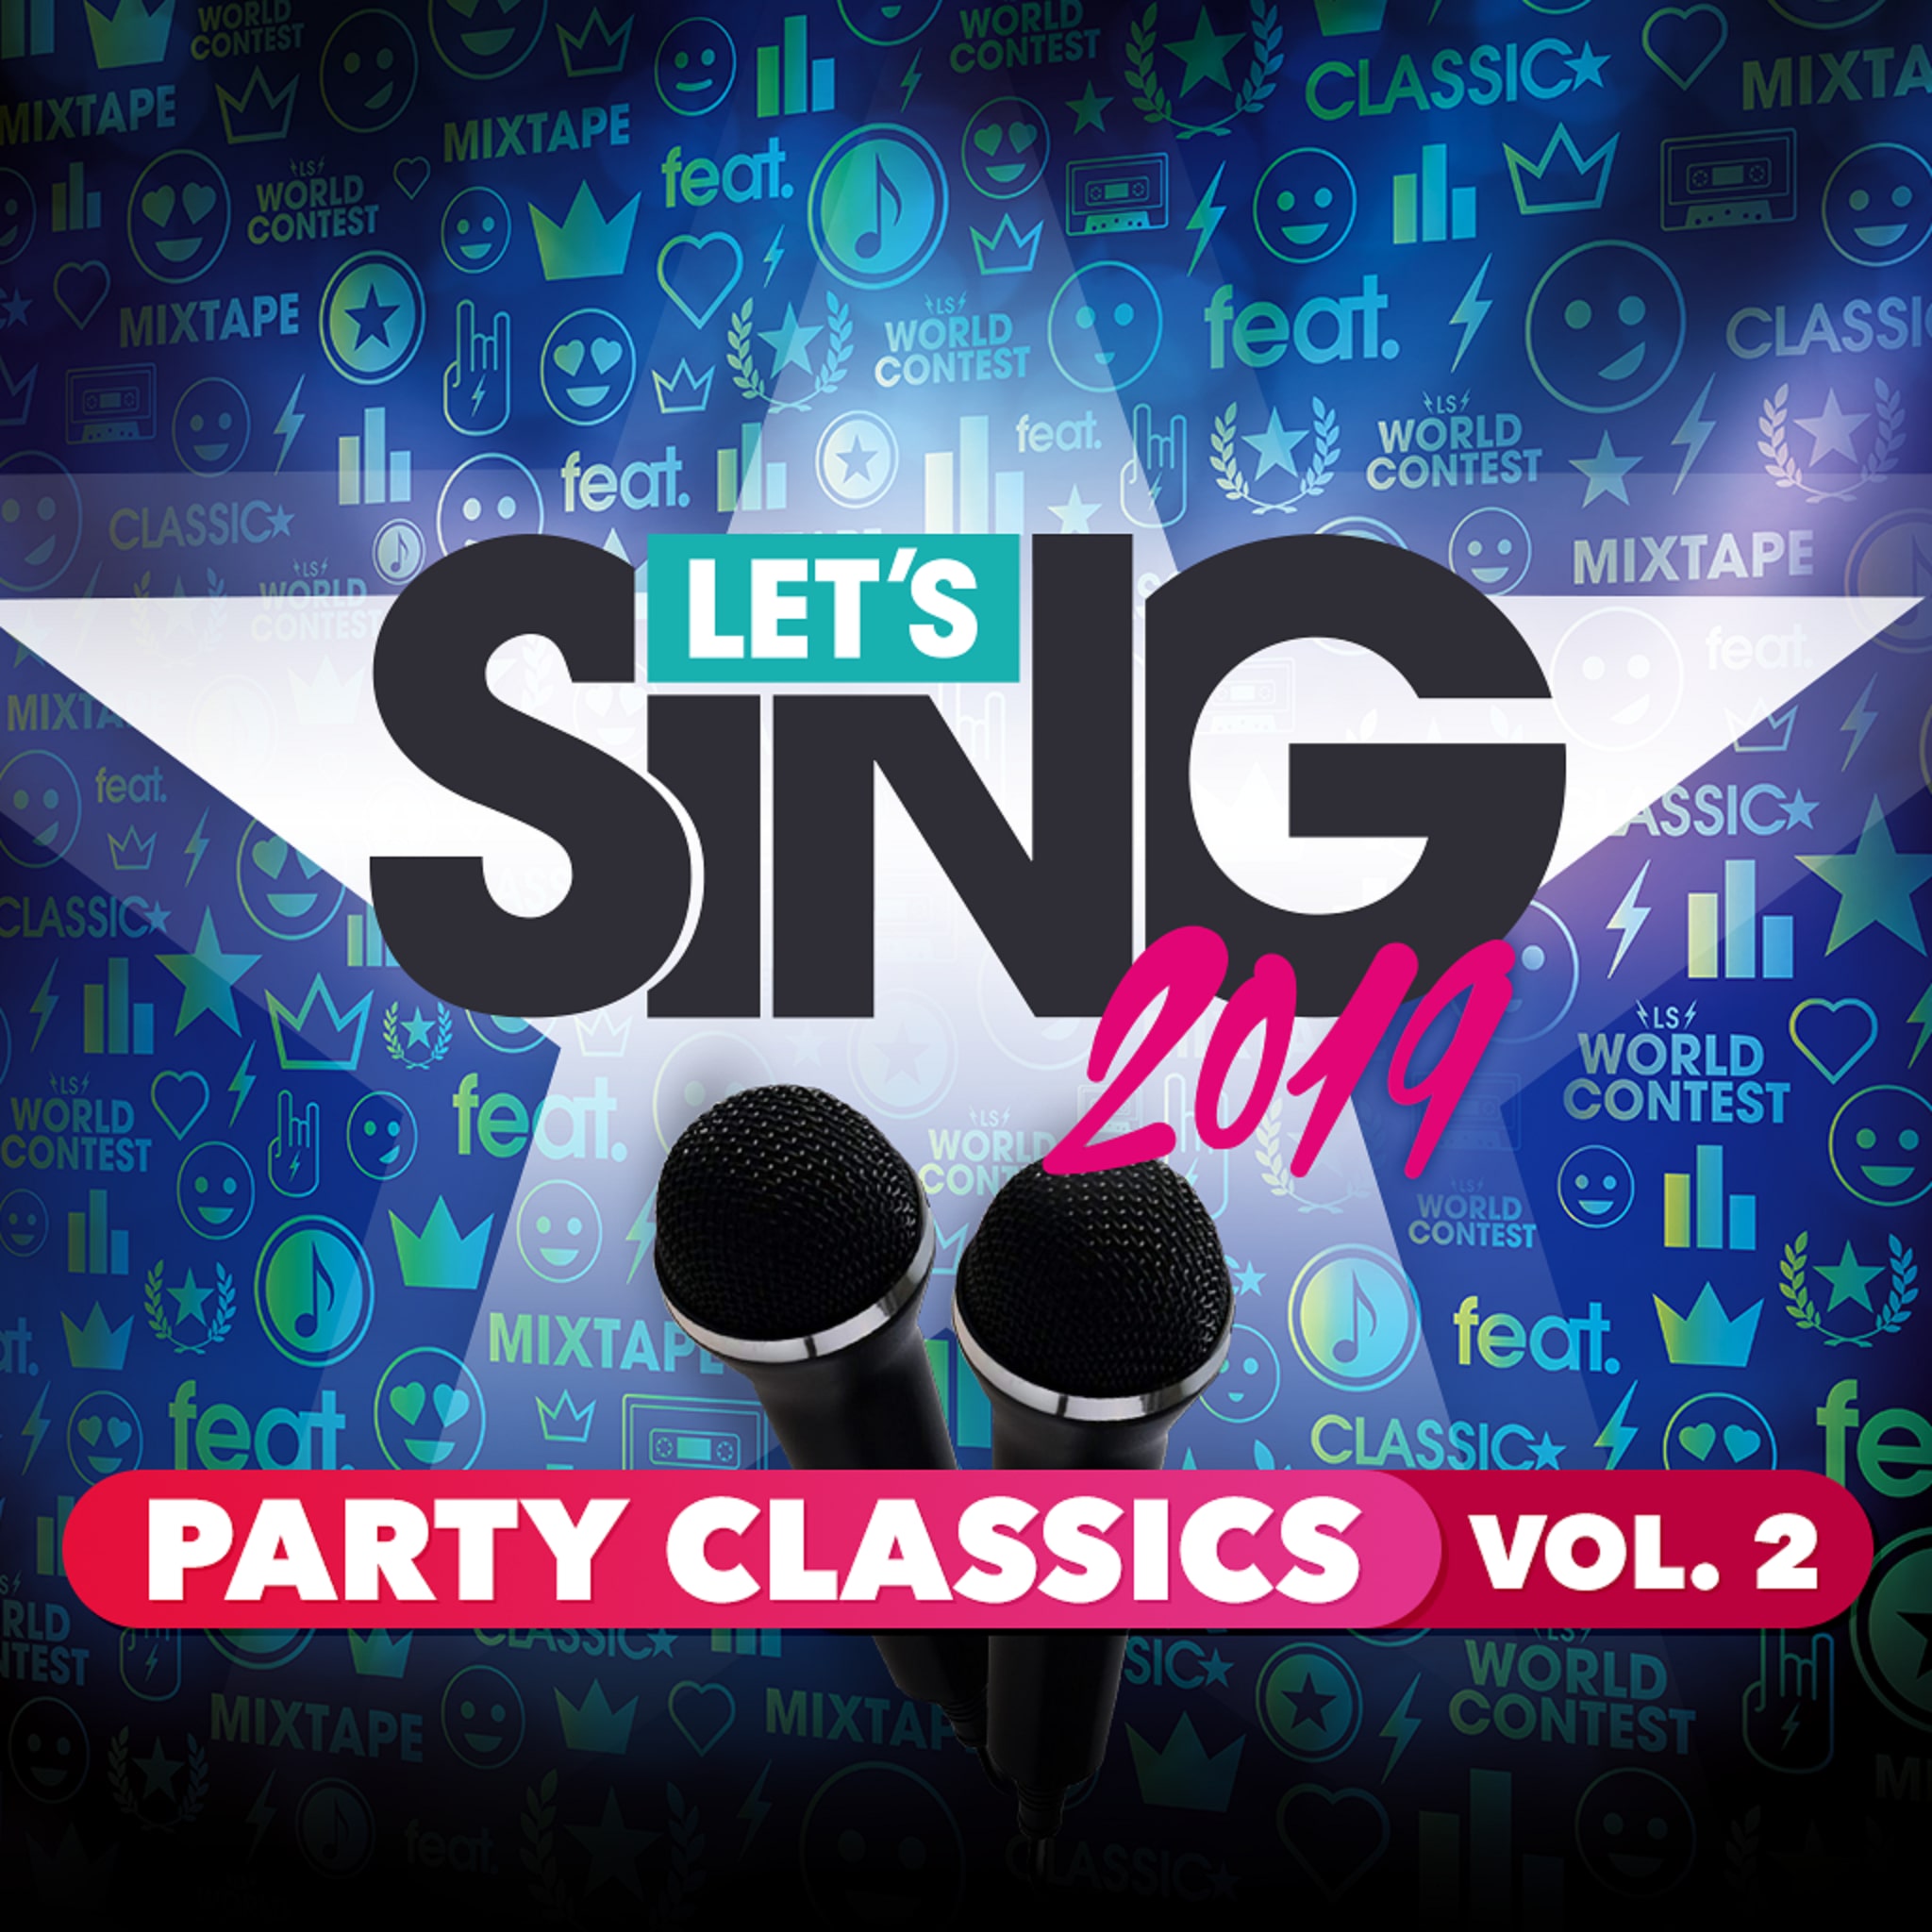 Let's Sing 2019 - Party Classics Vol. 2 Song Pack